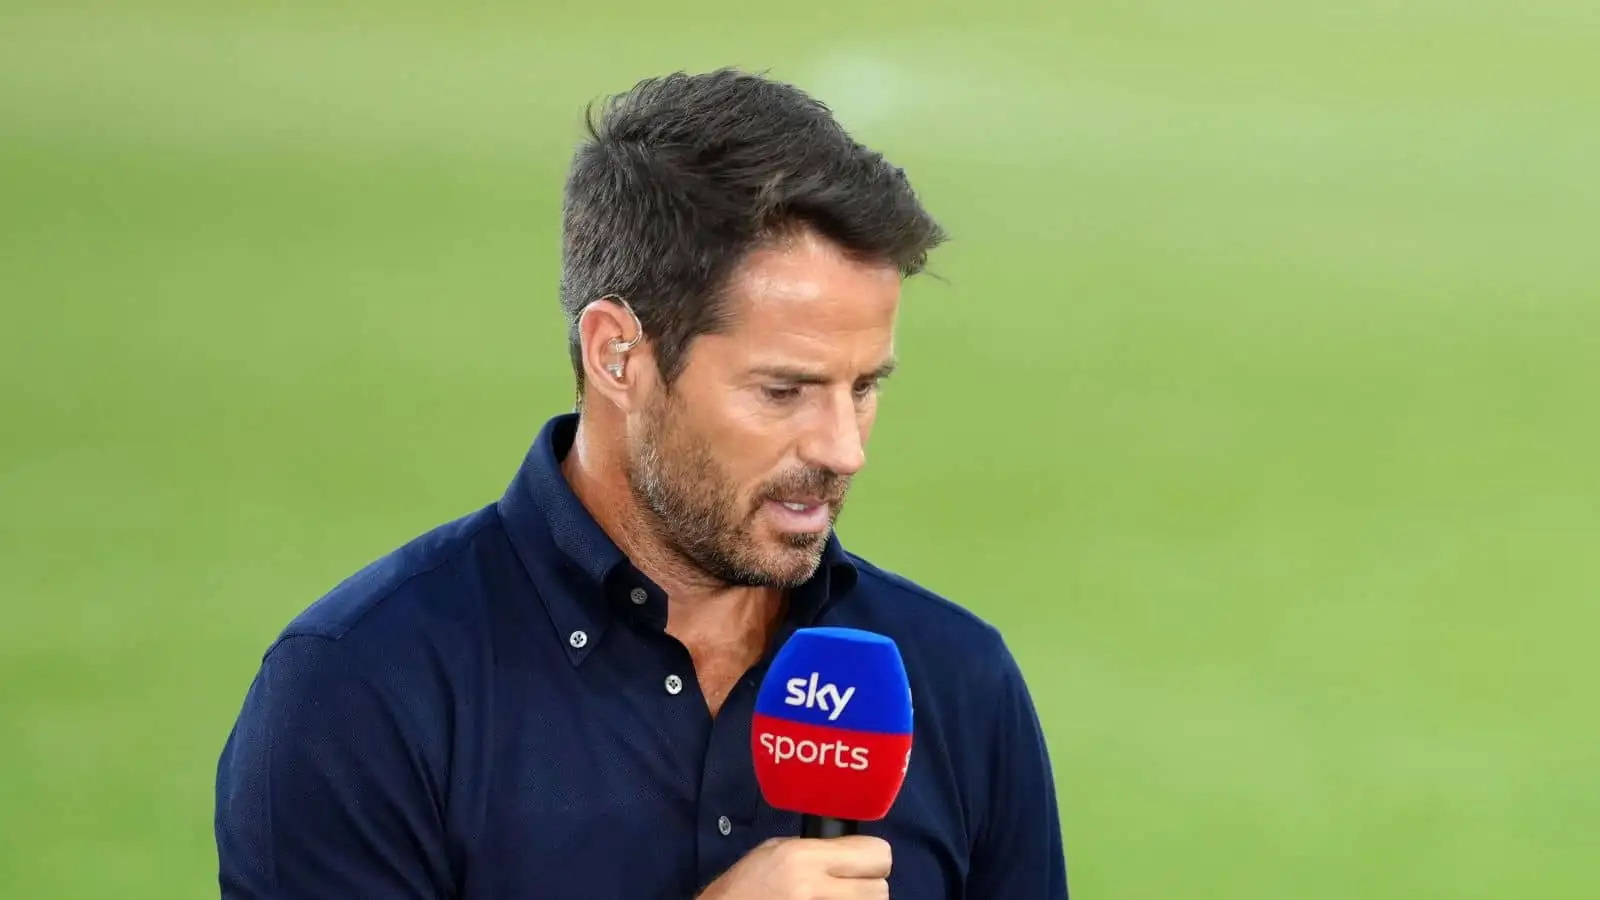 Liverpool star branded ‘erratic’ after shambolic display at Crystal Palace as Jamie Redknapp fires parting shot